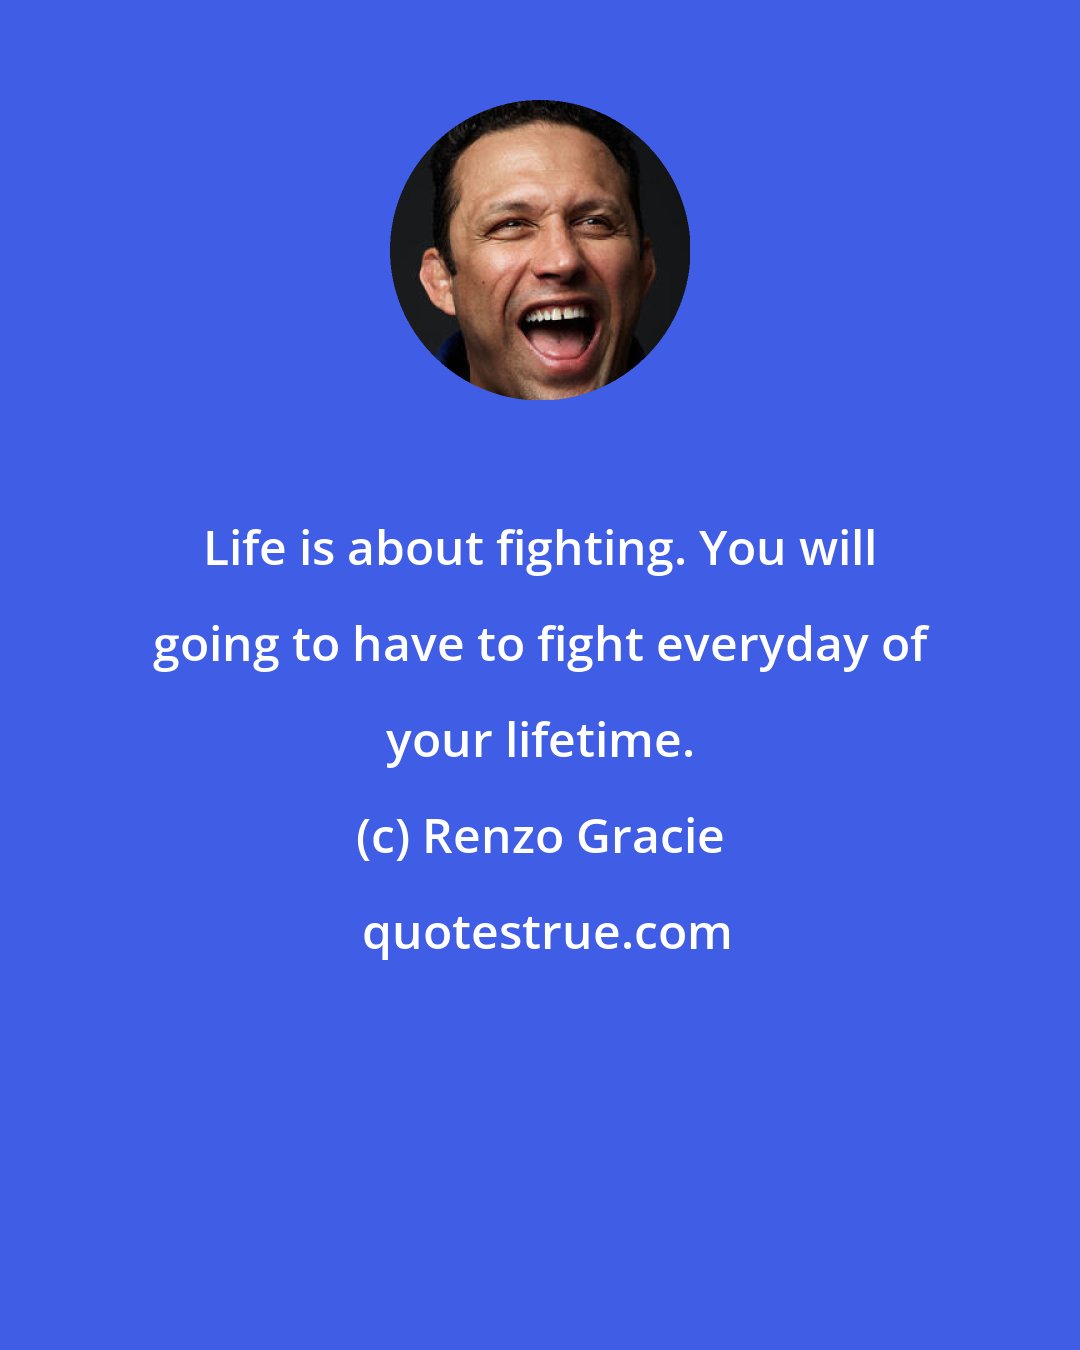 Renzo Gracie: Life is about fighting. You will going to have to fight everyday of your lifetime.